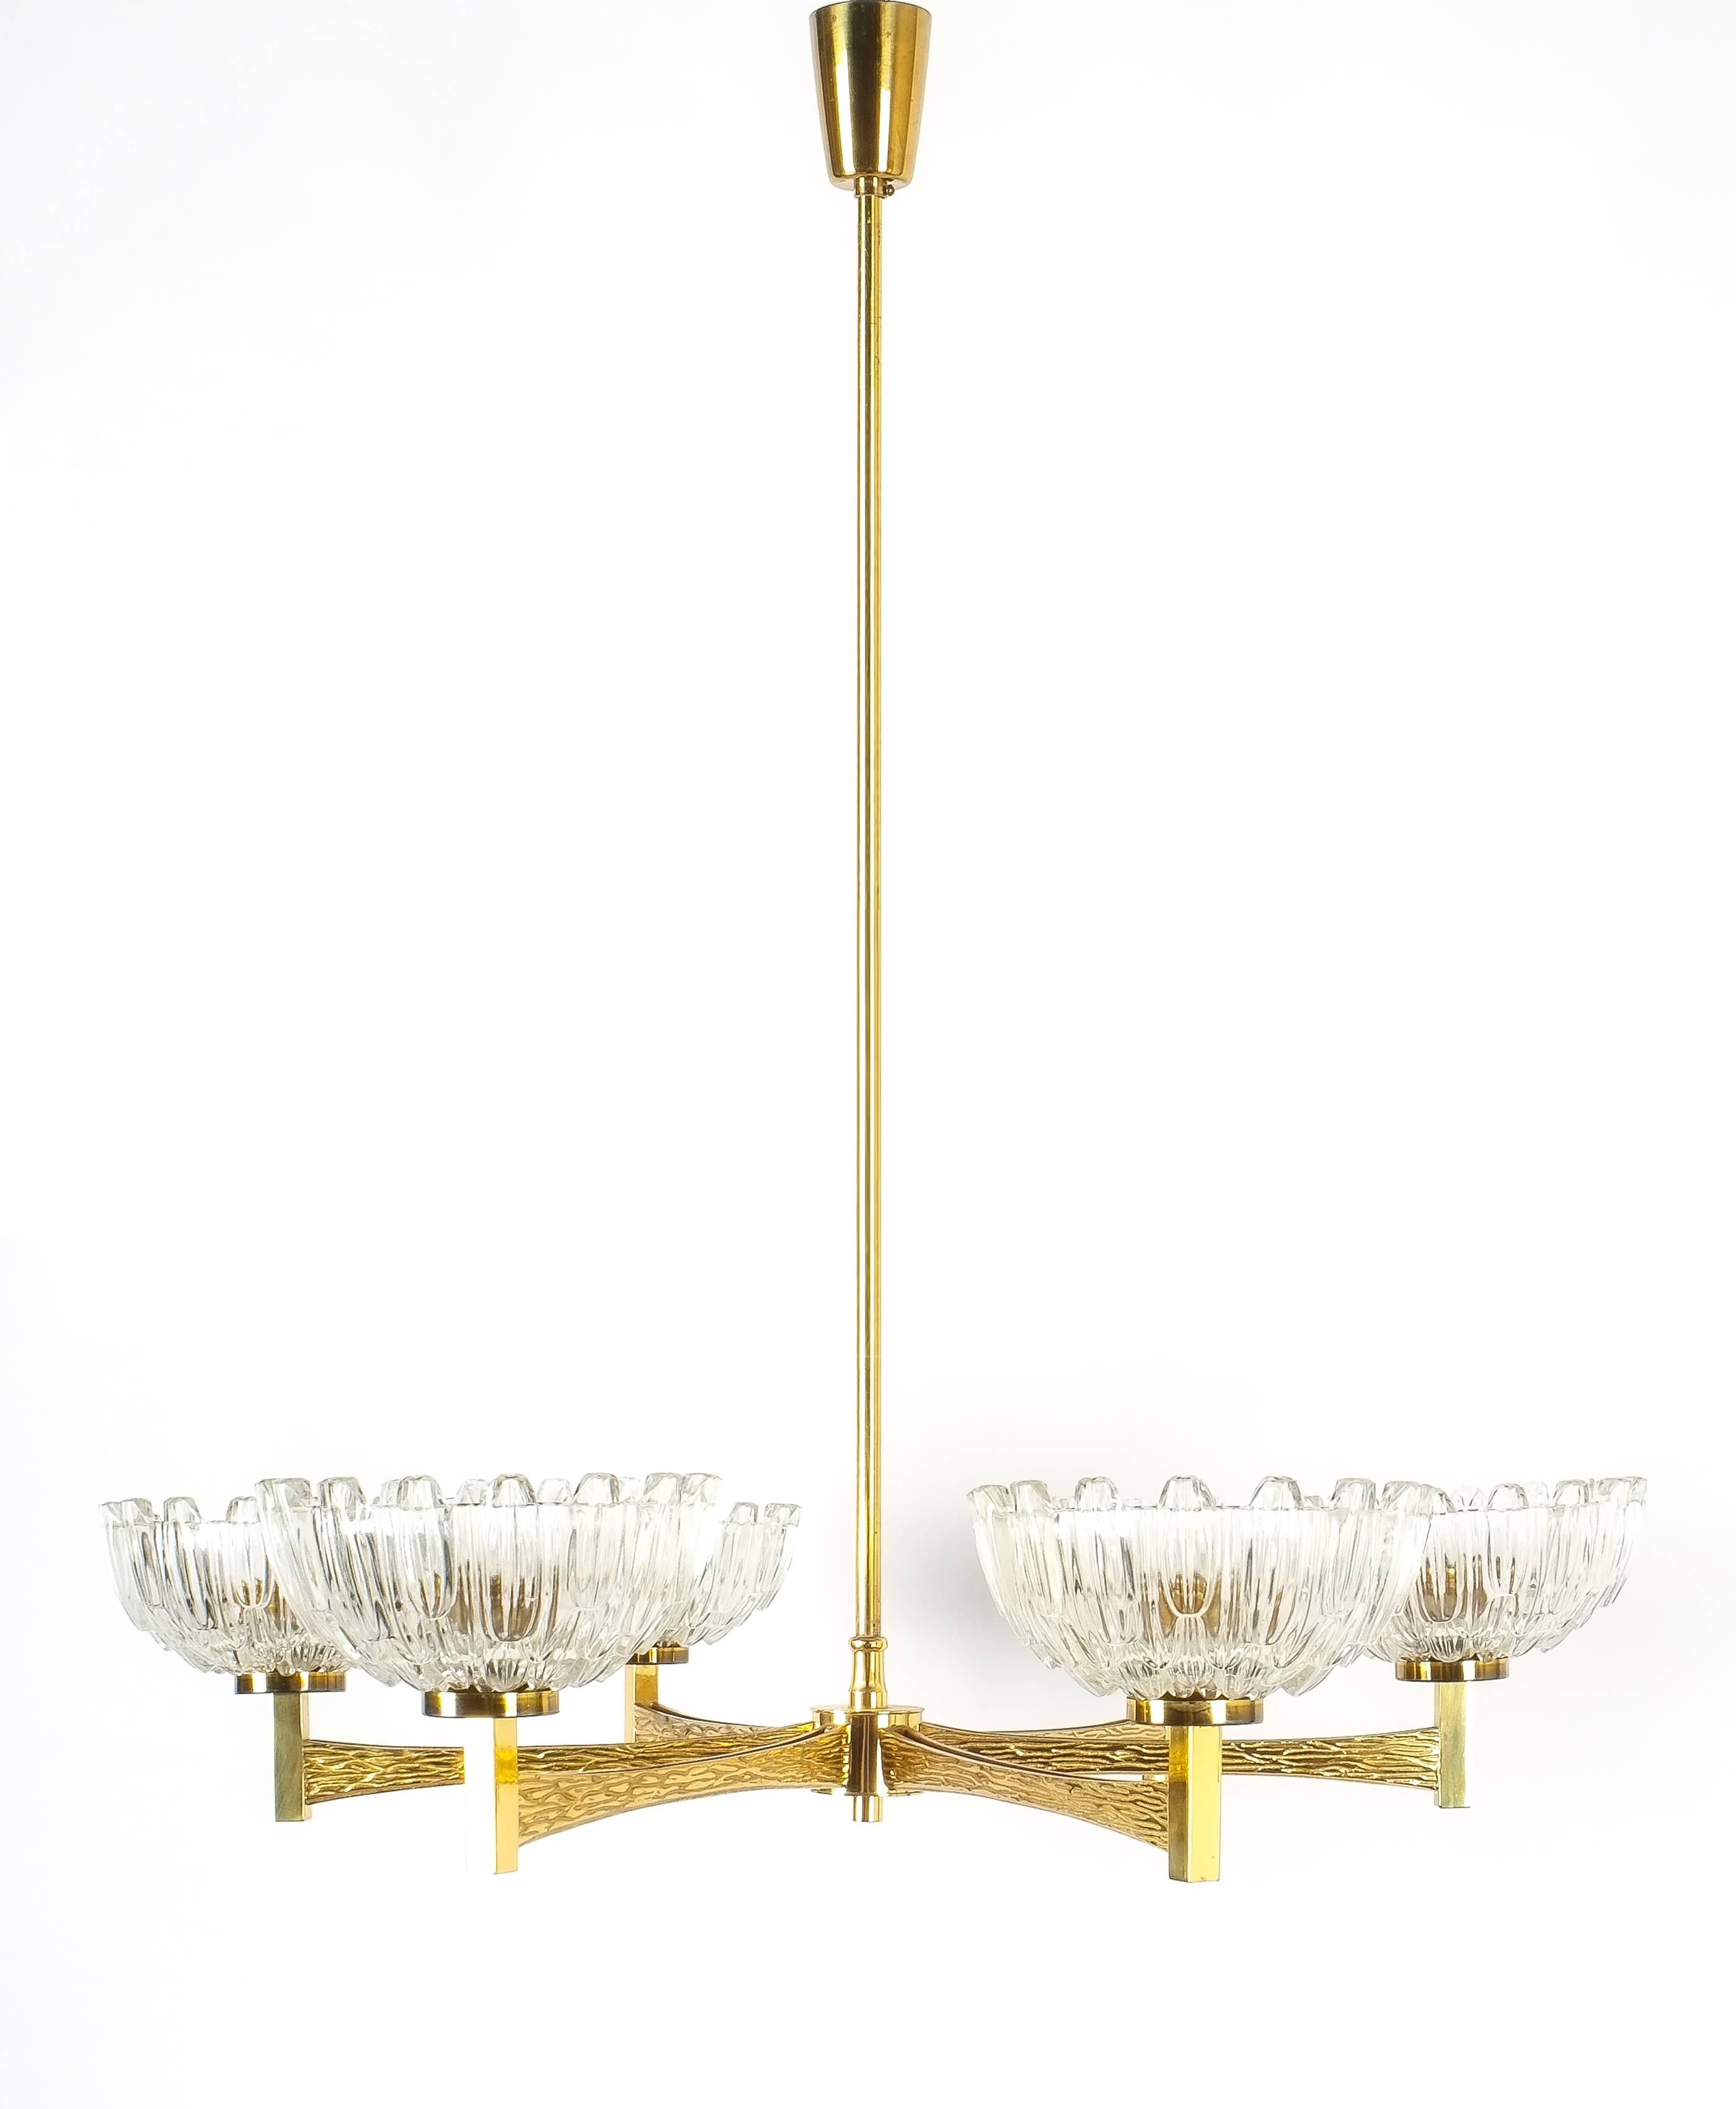 Exceptional brass frame chandelier with six frosted and polished crystal cups attributed to Hans-Agne Jakobsson, Sweden, 1960. Delicate details in the brass work and in excellent condition. Six large bulbs e27 with 60W each. The brass stem can be